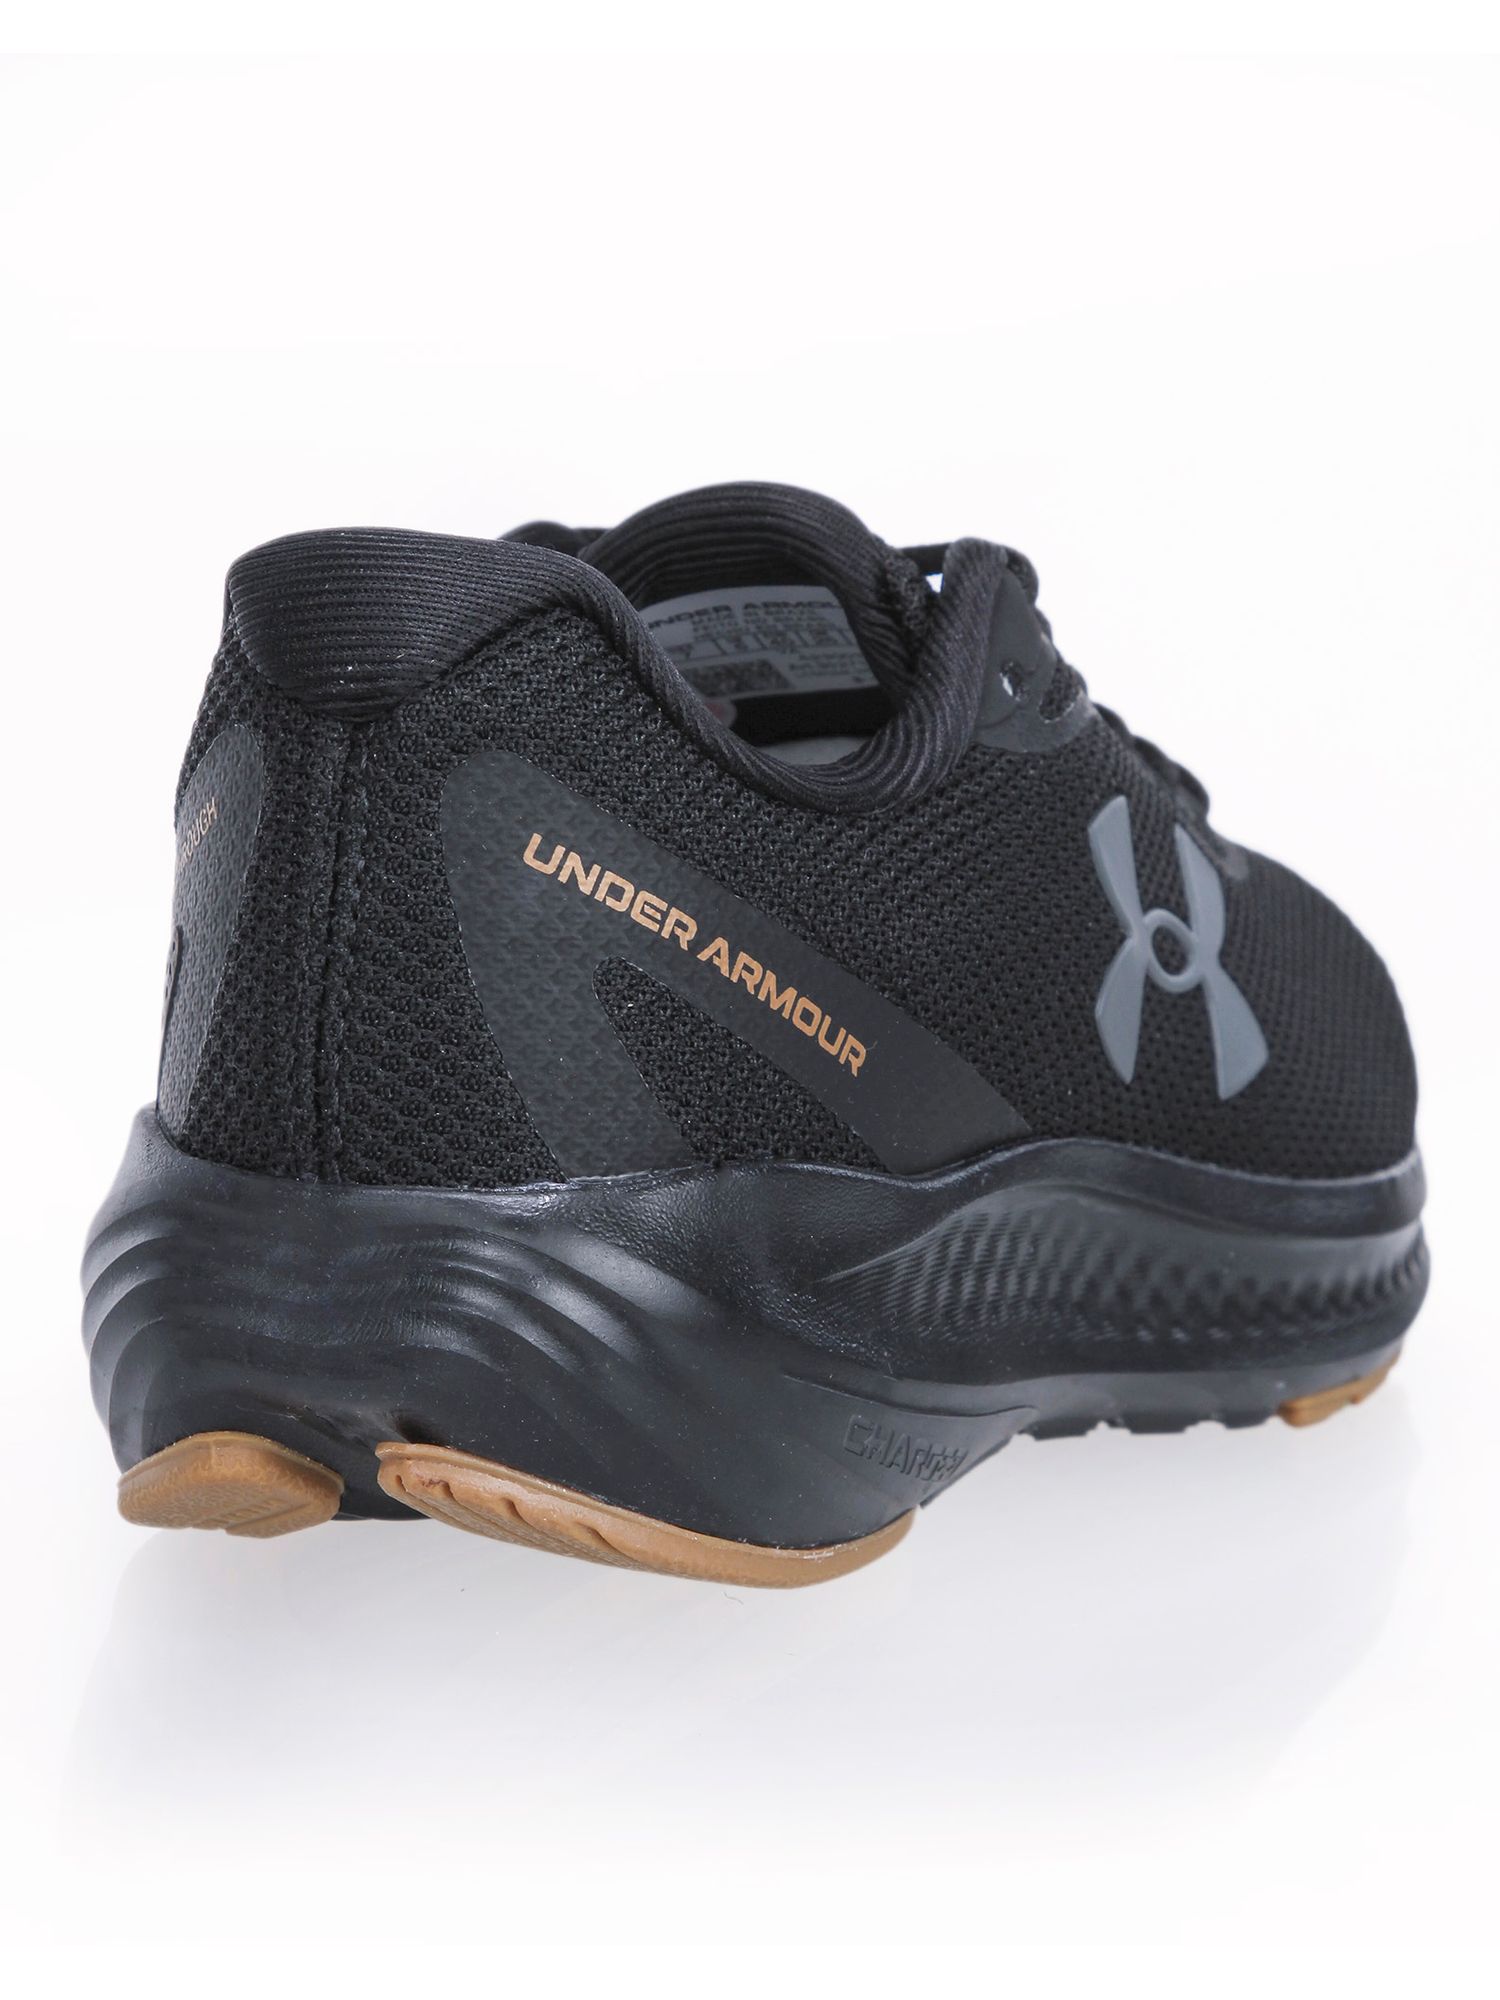 Tênis de Corrida Under Armour Charged Wing Masculino